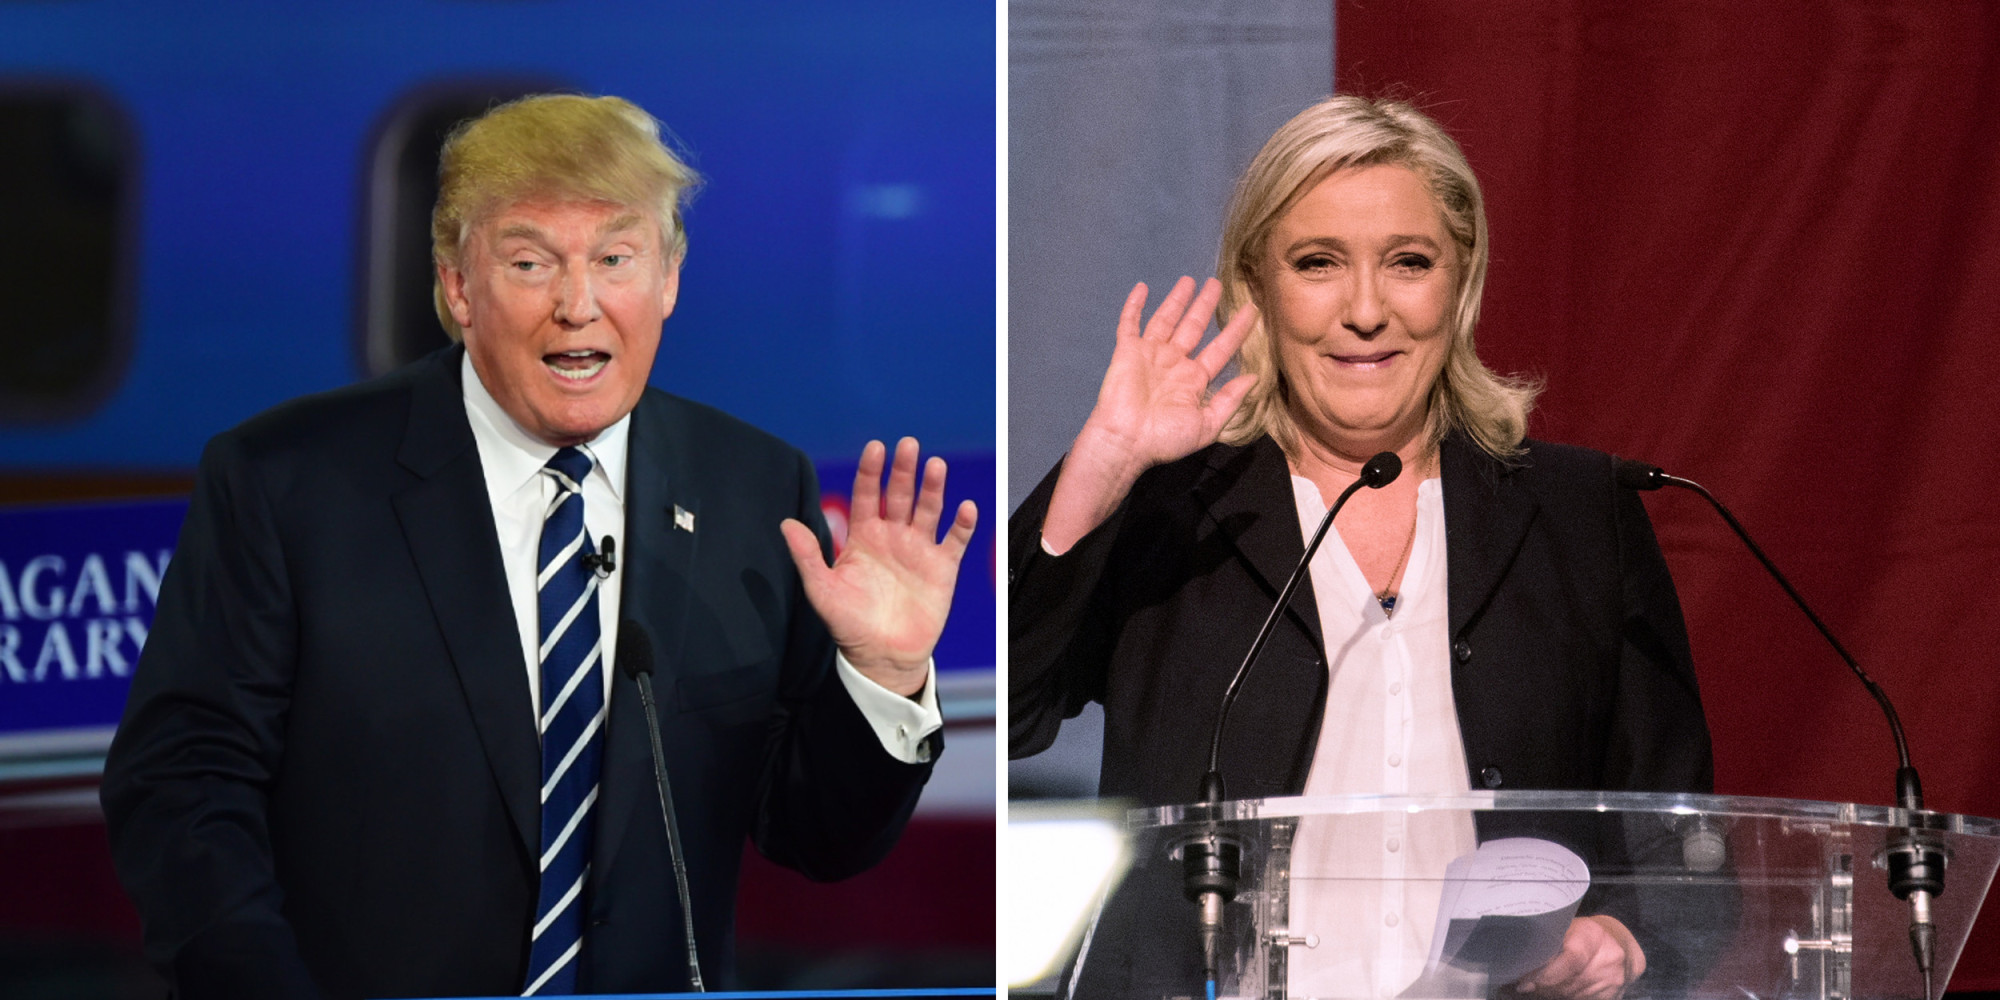 Why Trump support Le Pen? French version of Trump!